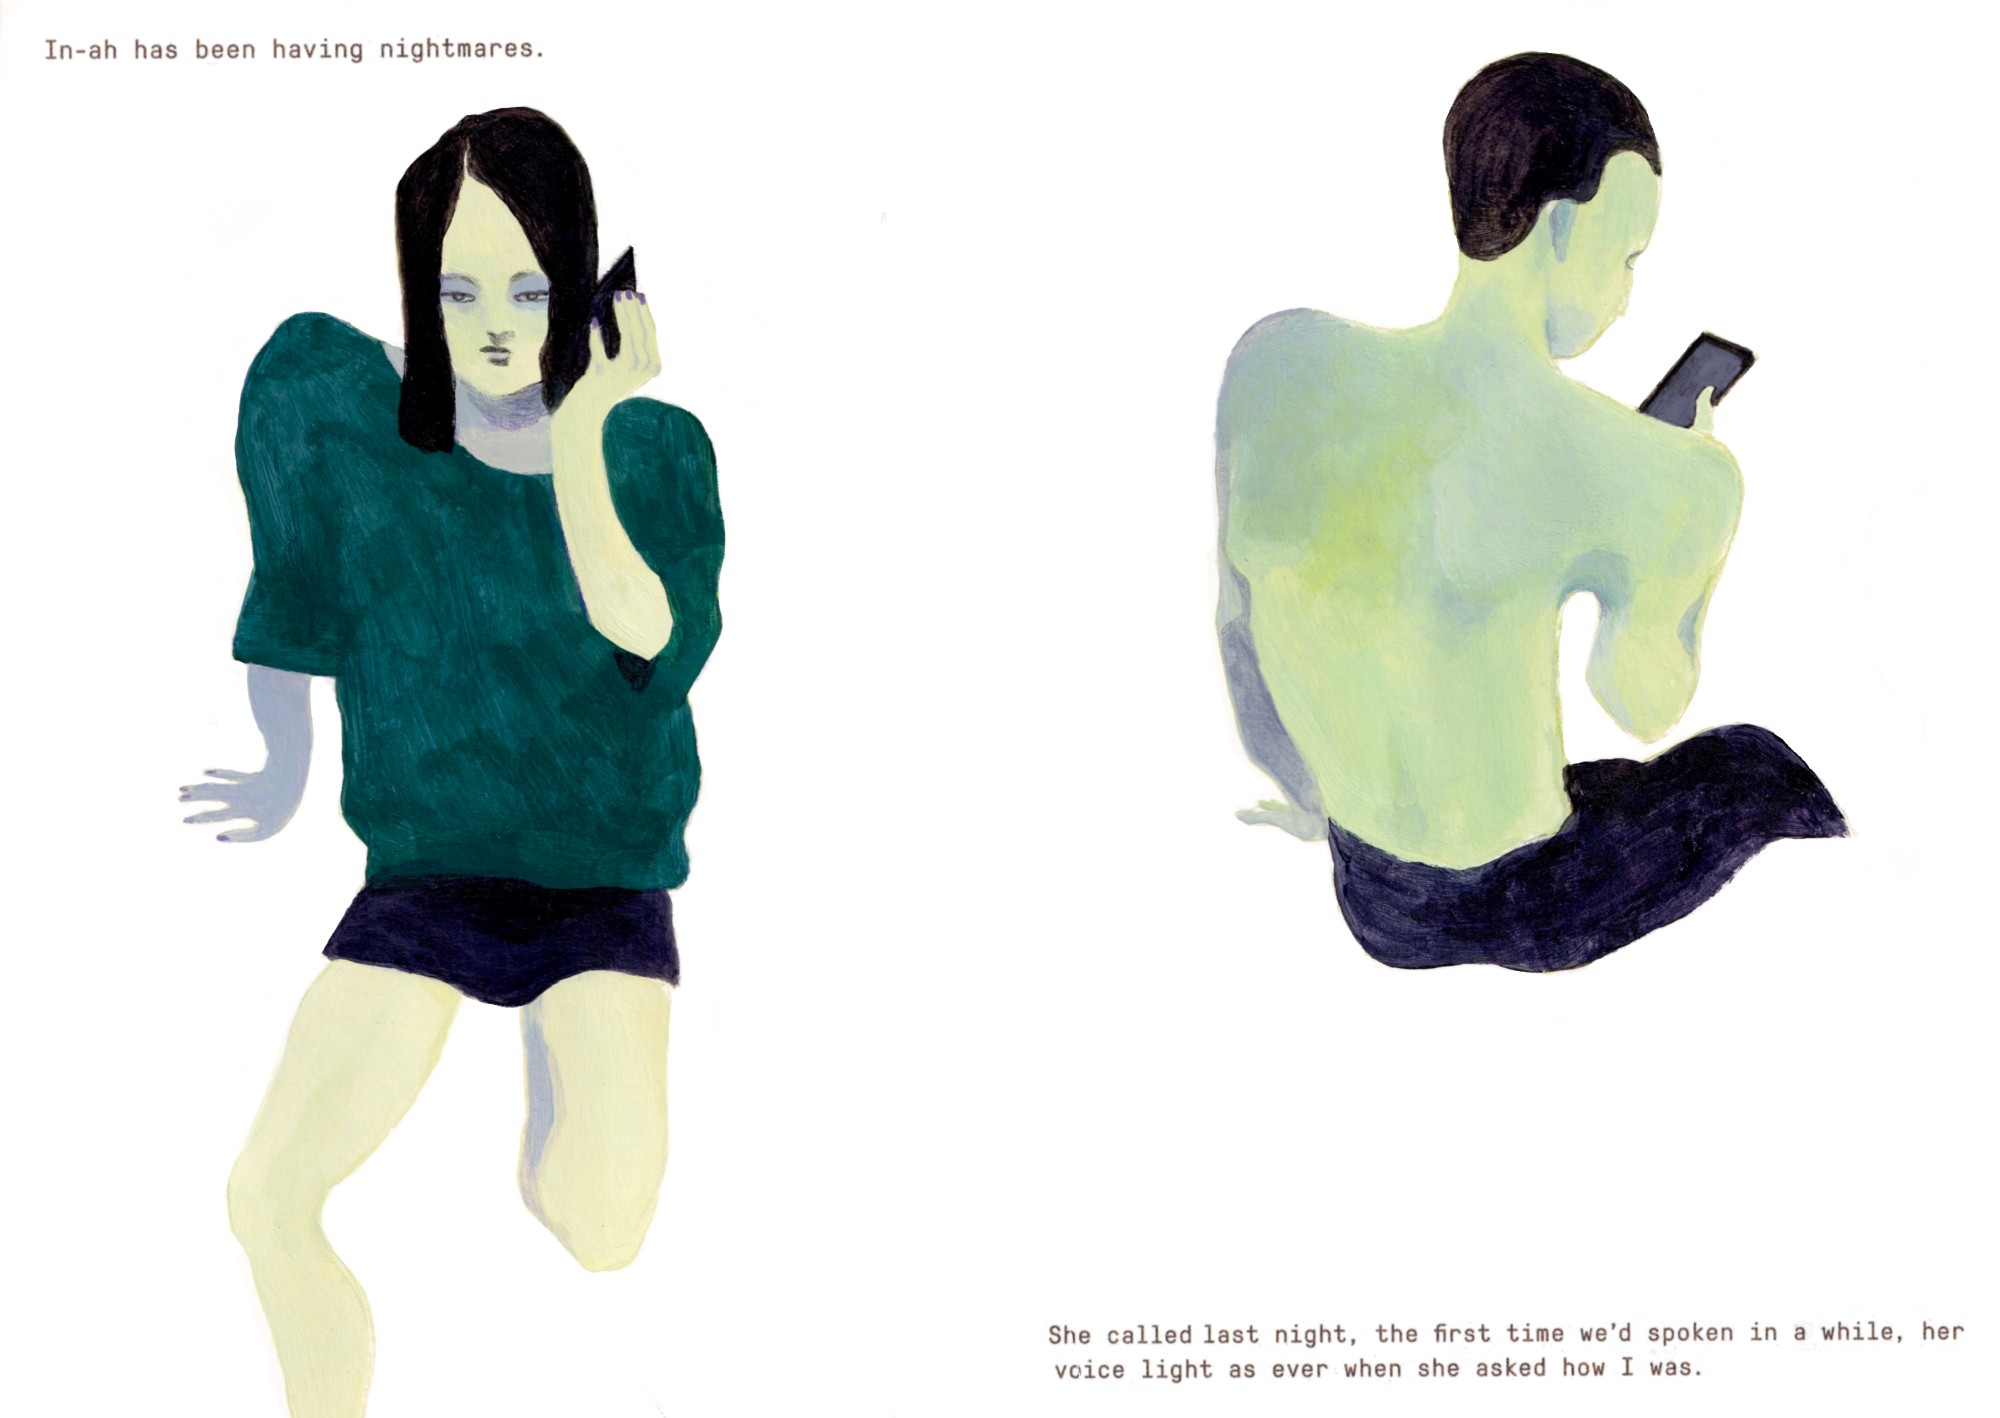 Anna McVey - Pages from a short graphic novel based on Europa by Han Kang